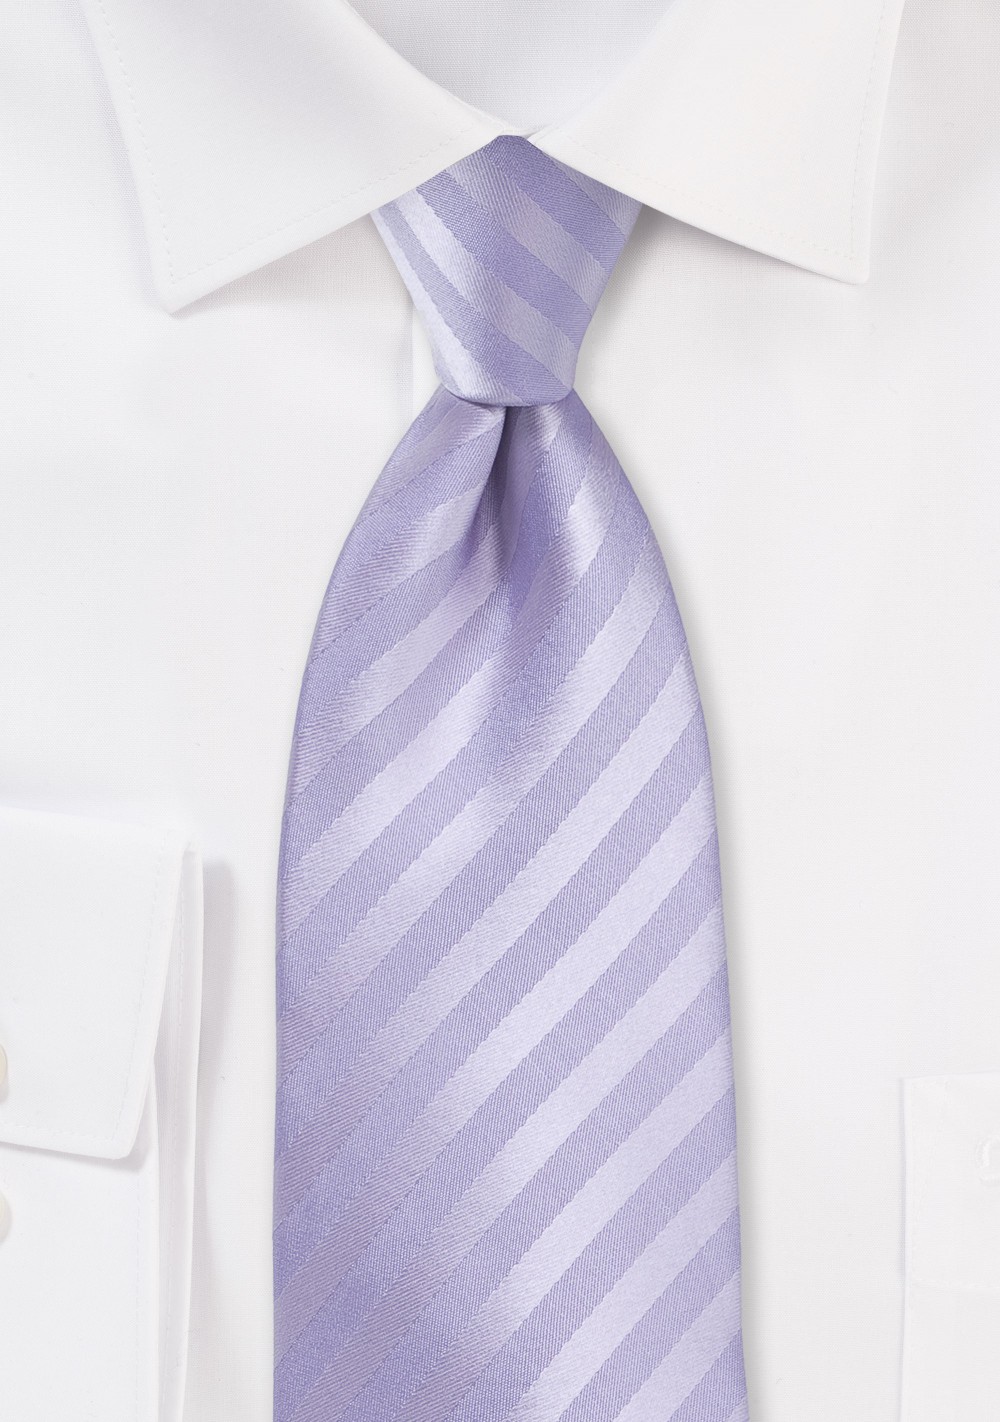 Extra Long Striped Tie in French Lavender